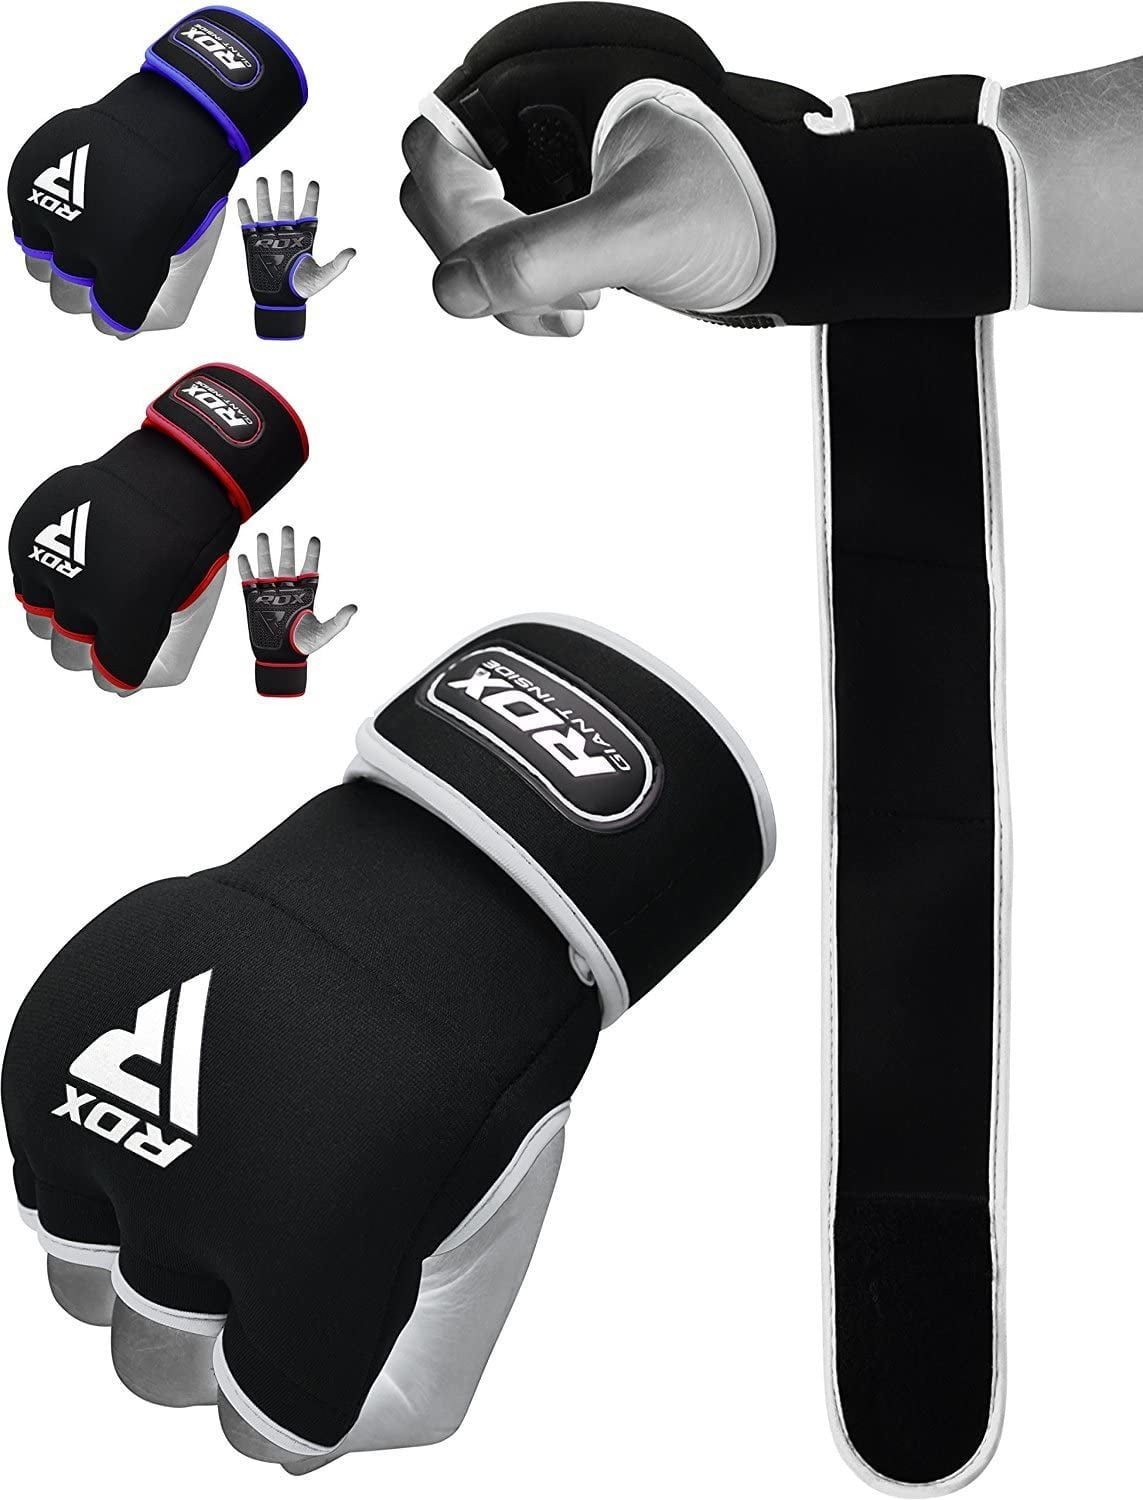 Hand Wraps Muay Thai Gloves Boxing Quick Bag Protector Inner Fist Bandages MMA 